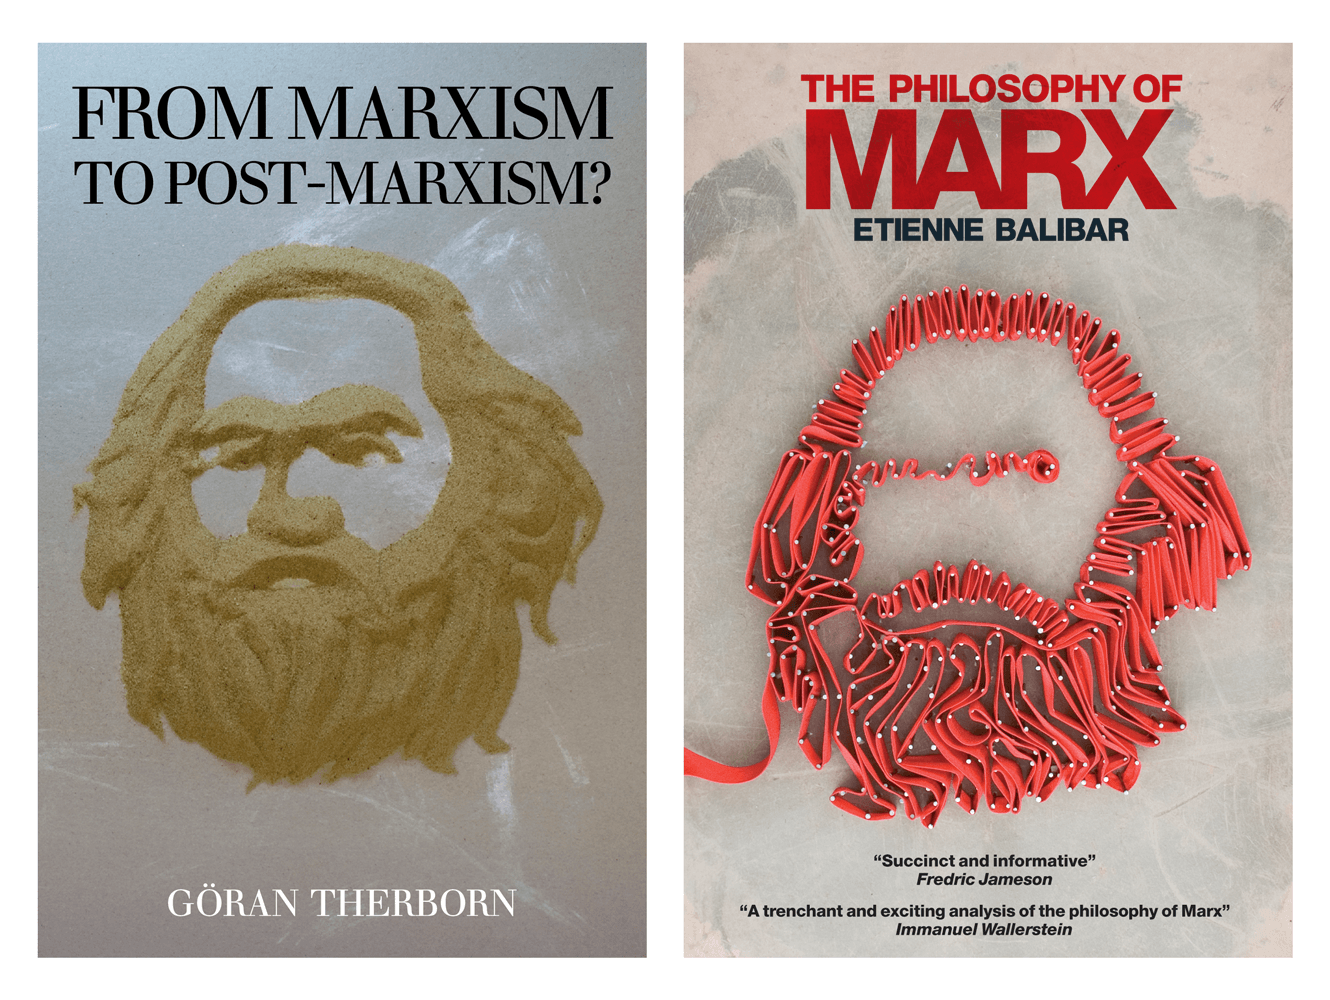 Book Cover Designs For Marxism To Post Marxism And The Philosophy Of Marx Book By Verso Books. Designed By &&& Creative